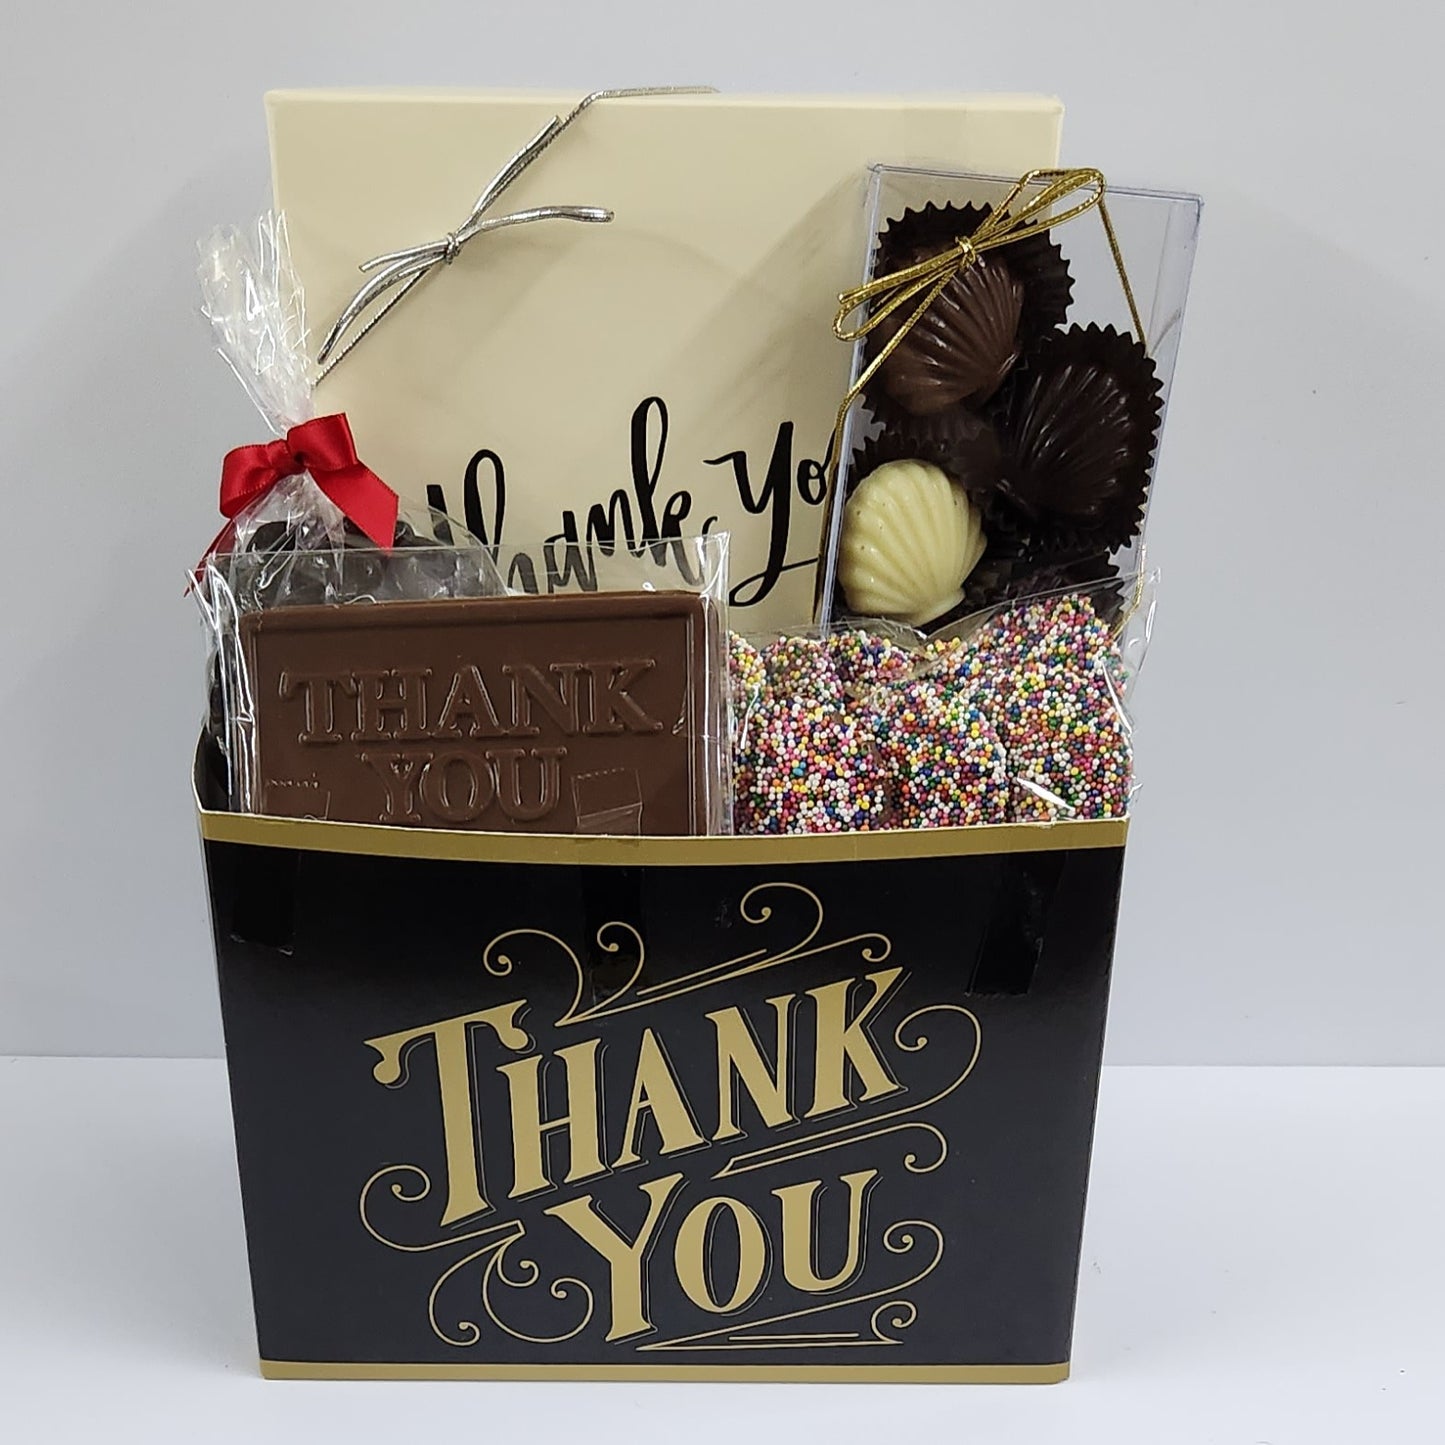 Happy Mother's Day Gift Basket – Stage Stop Candy